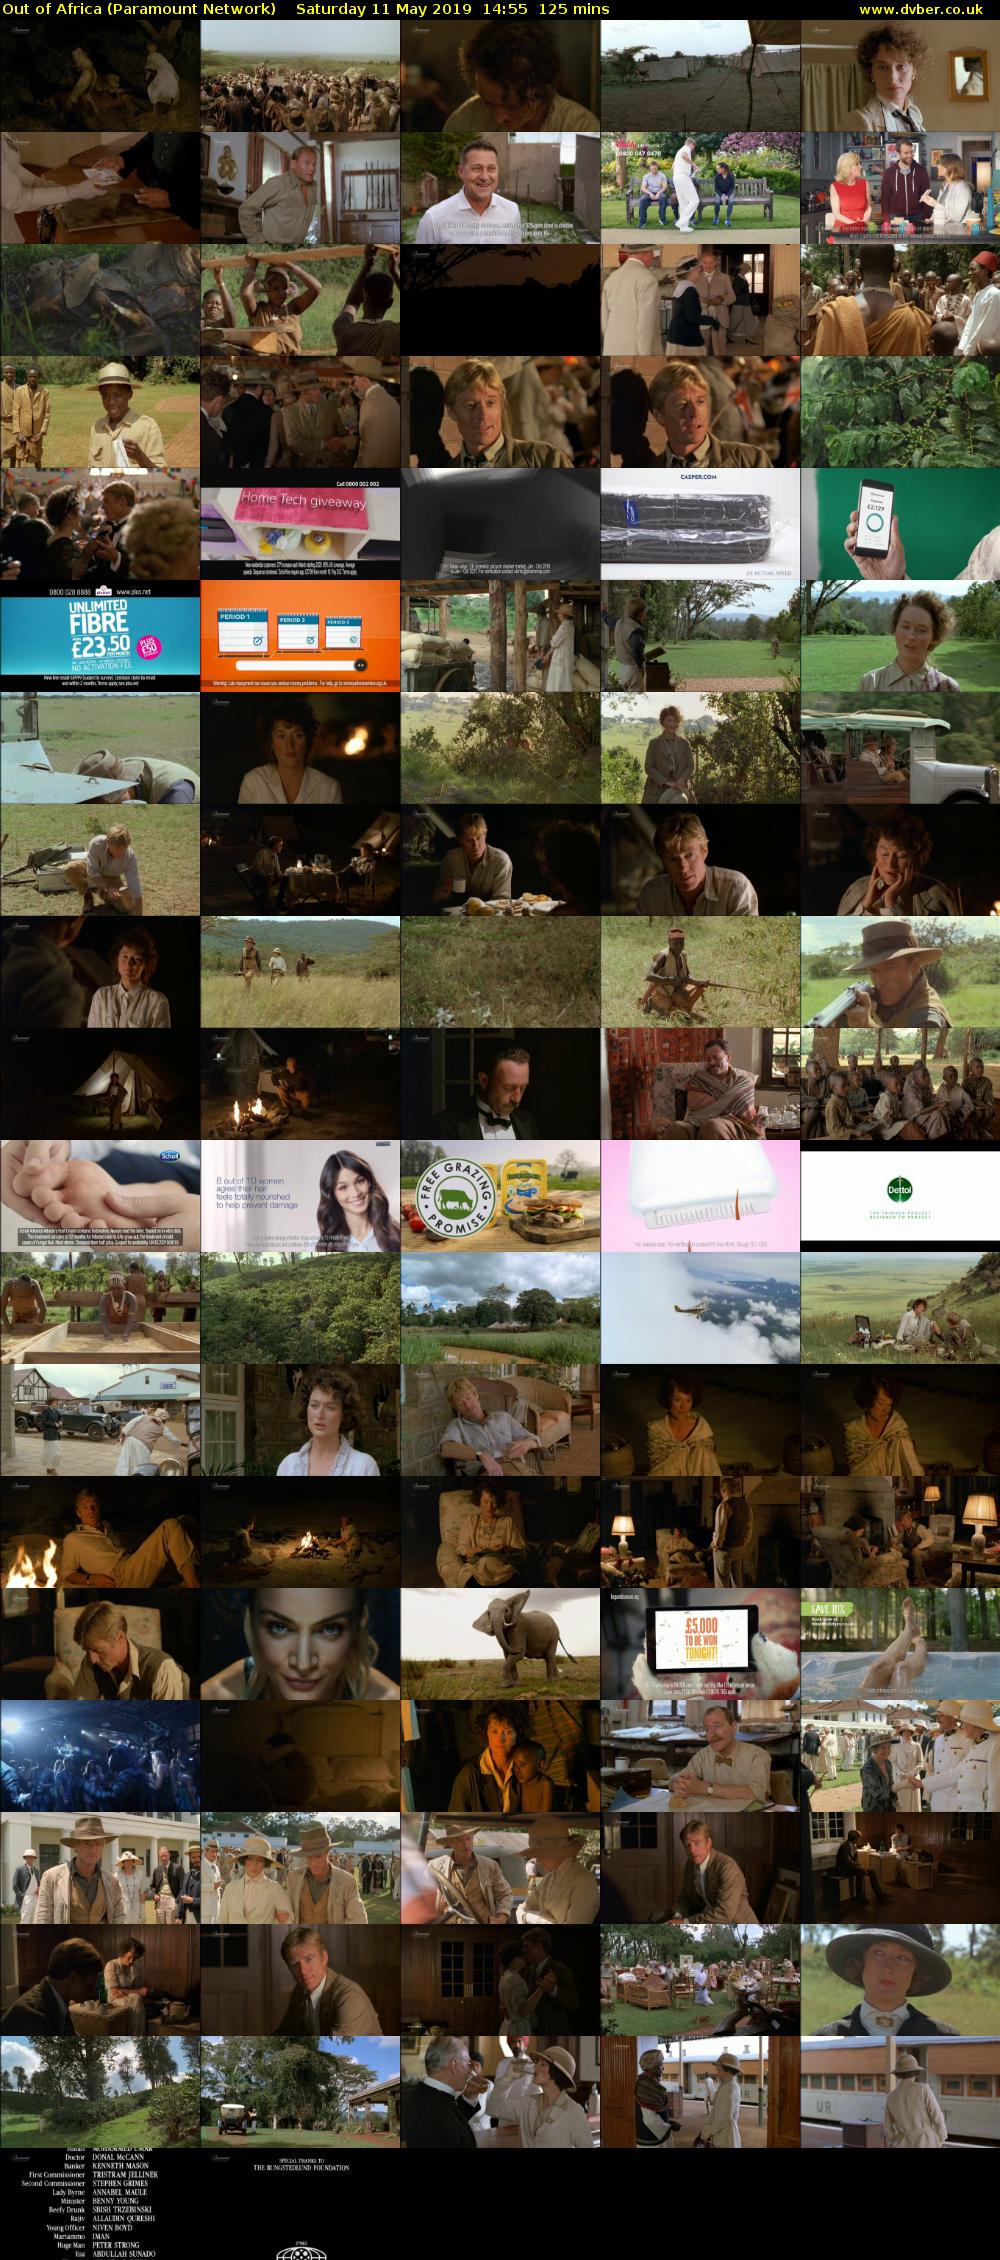 Out of Africa (Paramount Network) Saturday 11 May 2019 14:55 - 17:00